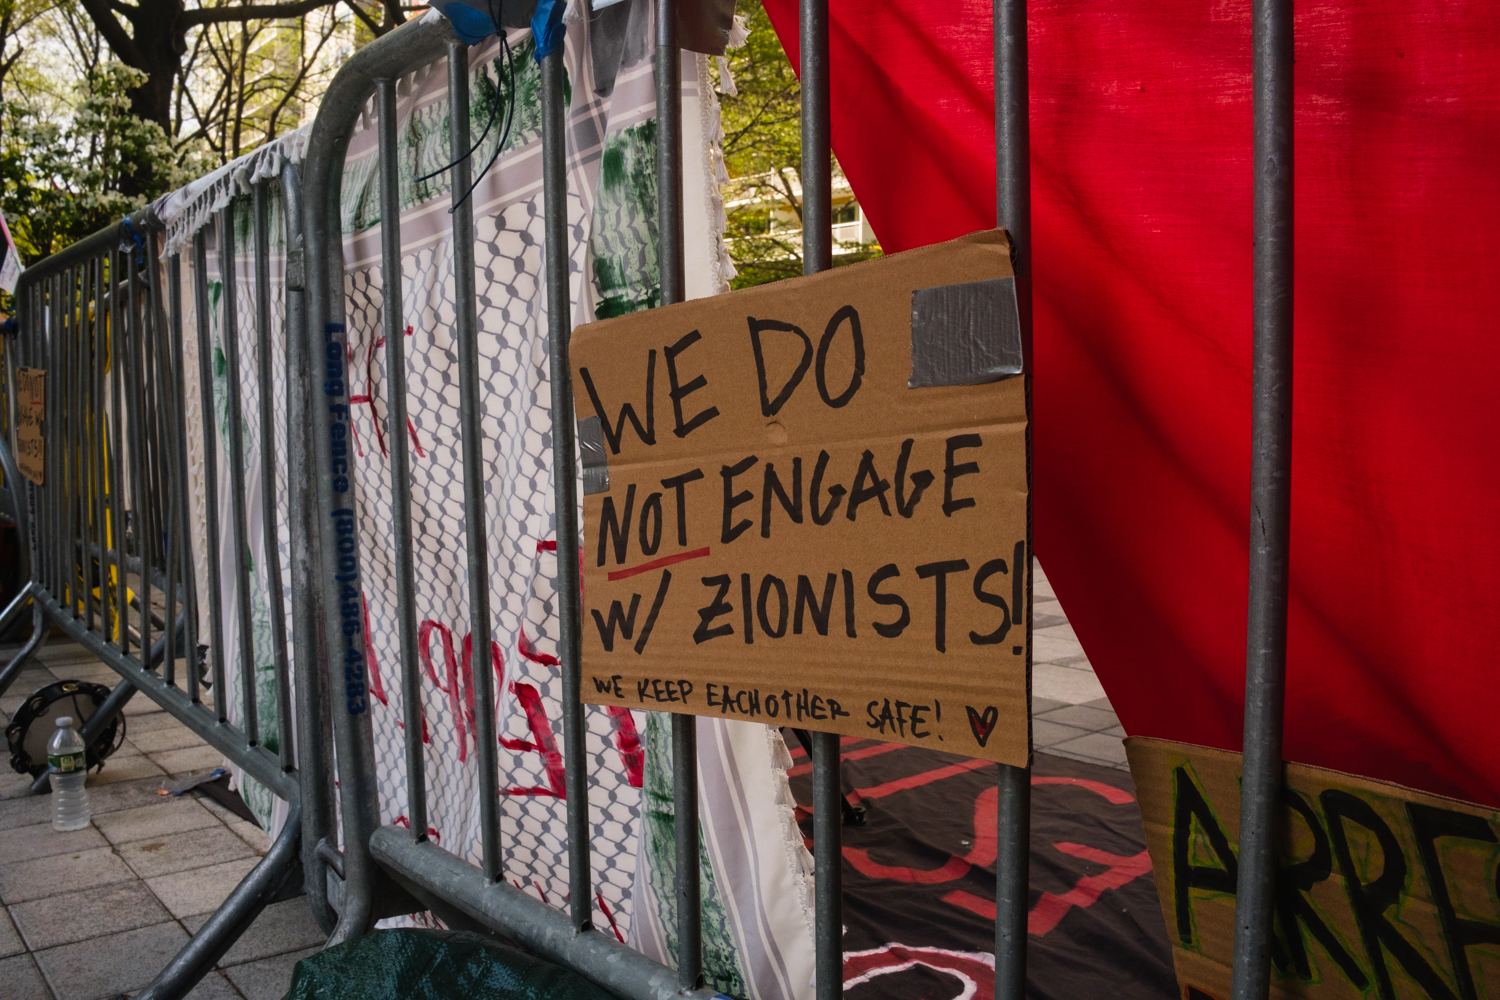 A sign attached to a barricade read “We do not engage with Zionists!”